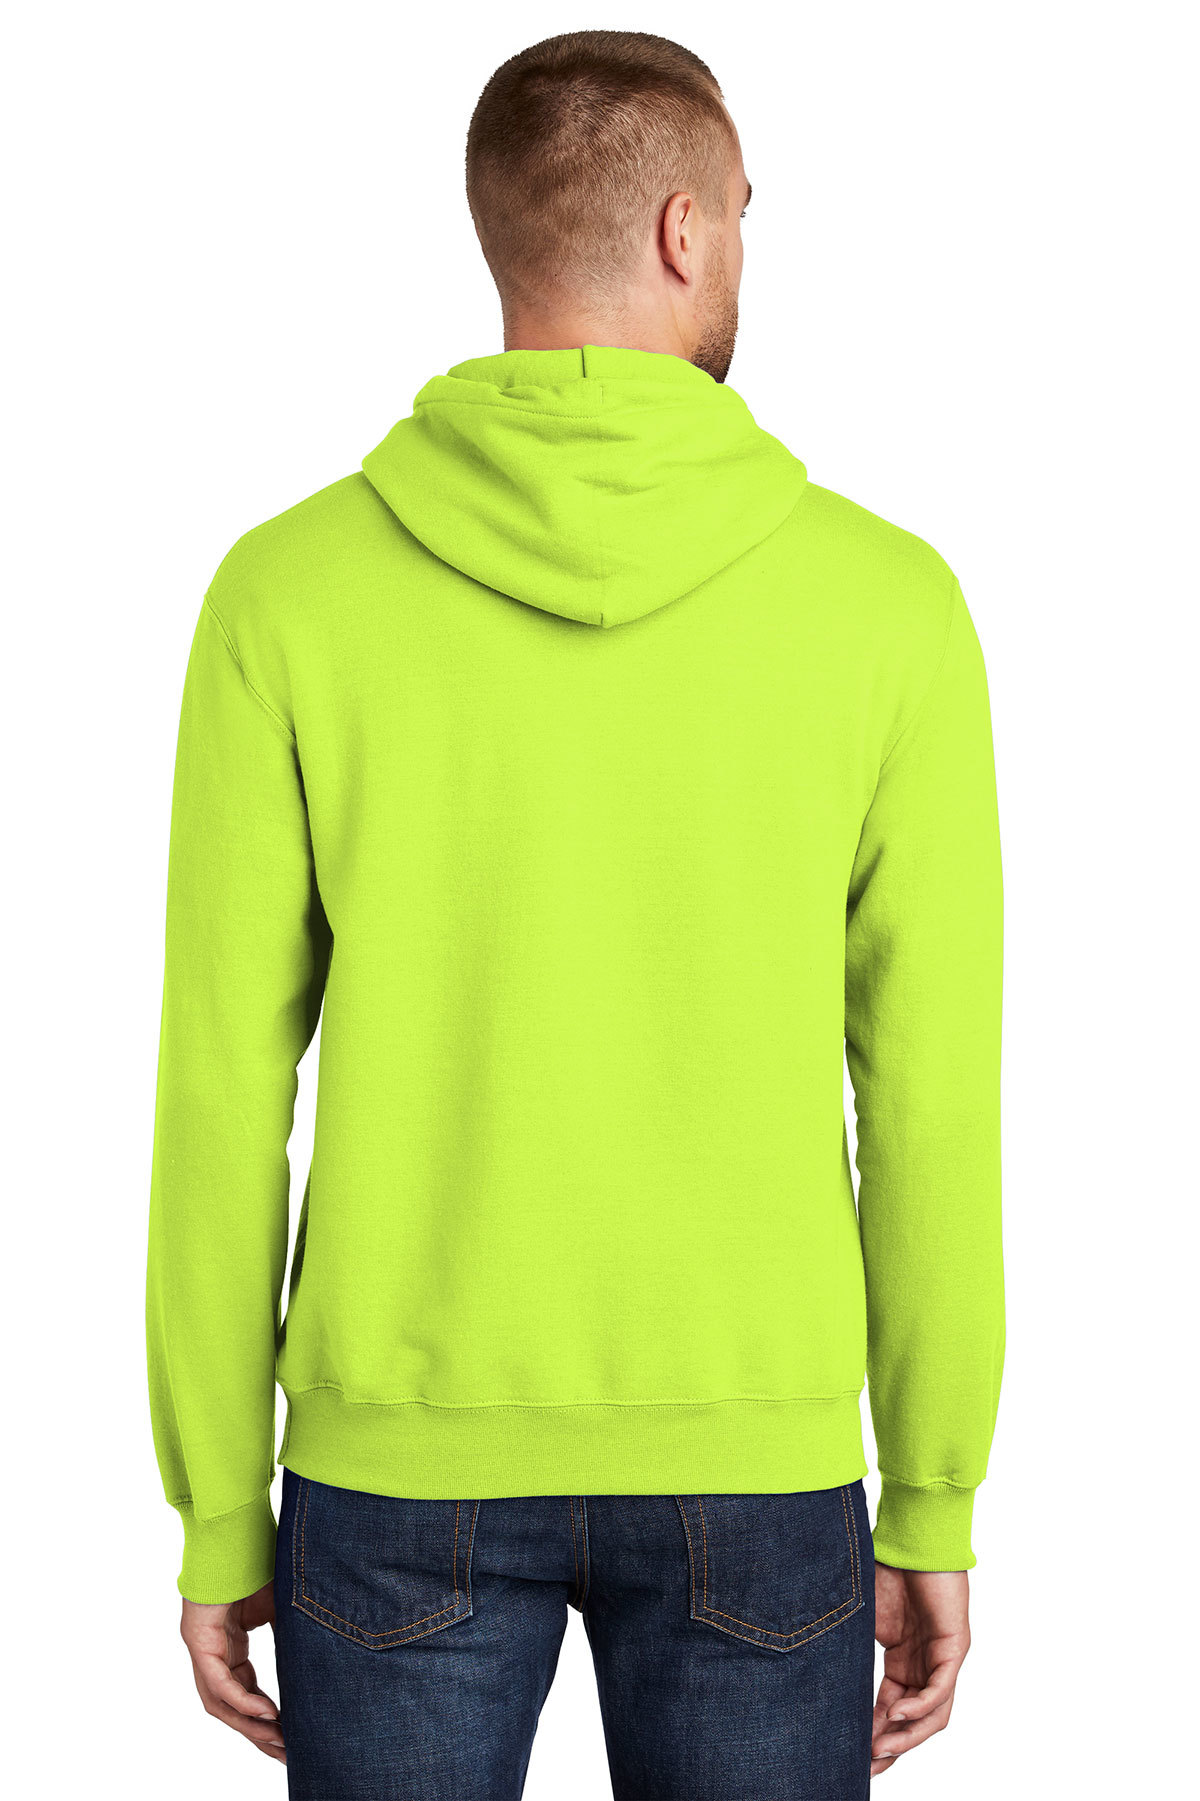 Large Safety Green Port & Company Mens Pullover Pocket Hooded Sweatshirt